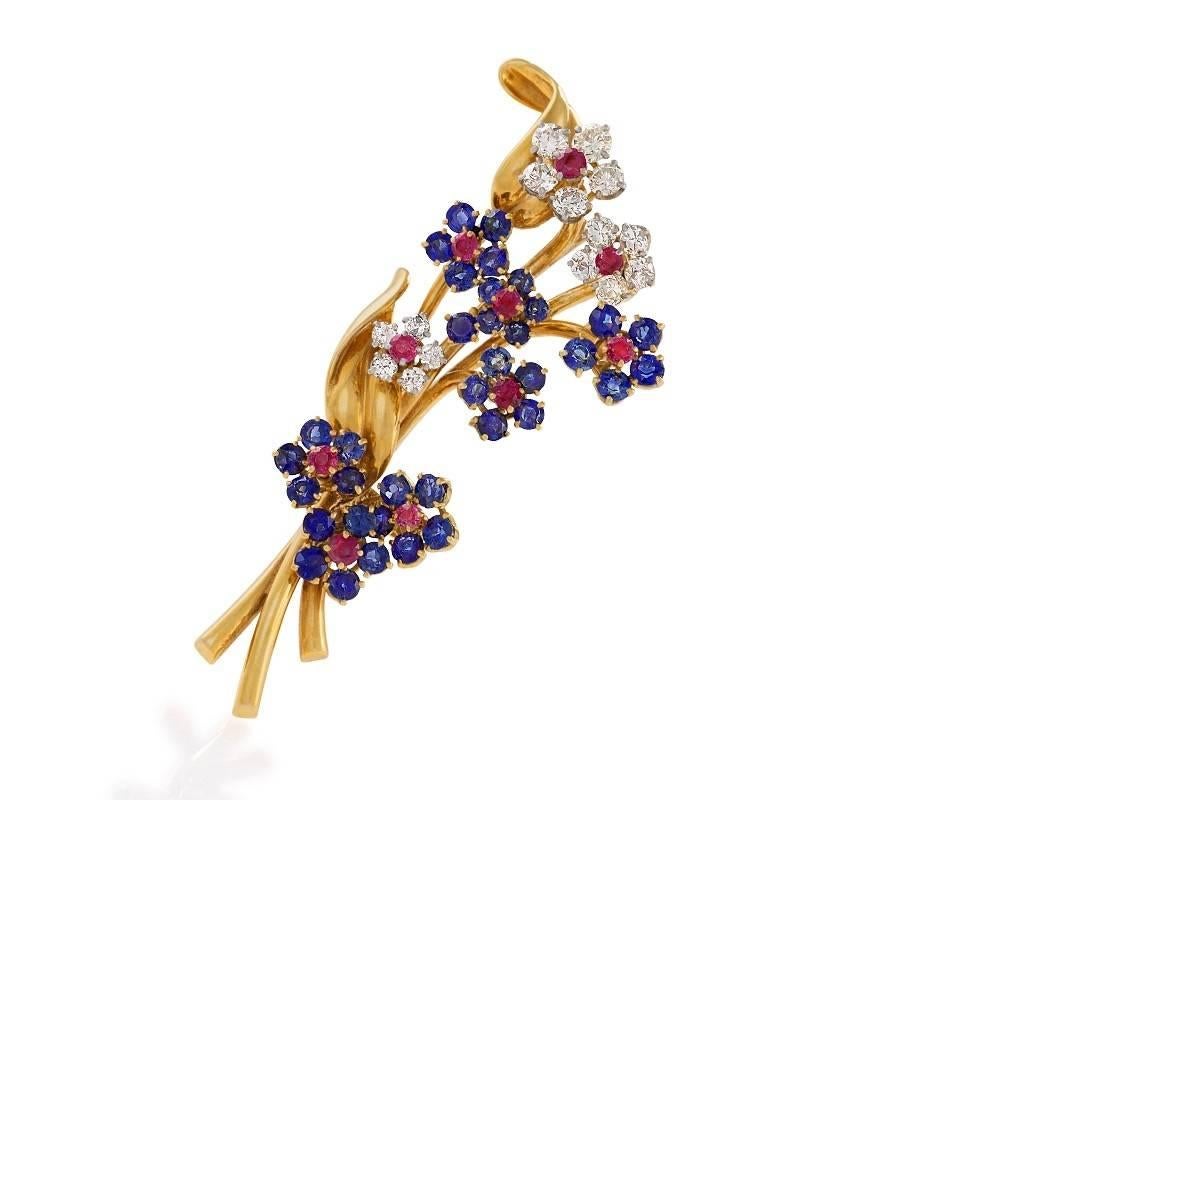 A Mid-20th Century 18 karat gold 'Hawaii' brooch with diamonds, rubies and sapphires by Van Cleef & Arpels. The brooch has 15 round diamonds with an approximate total weight of 1.35 carats, 10 round rubies with an approximate total weight of 1.00